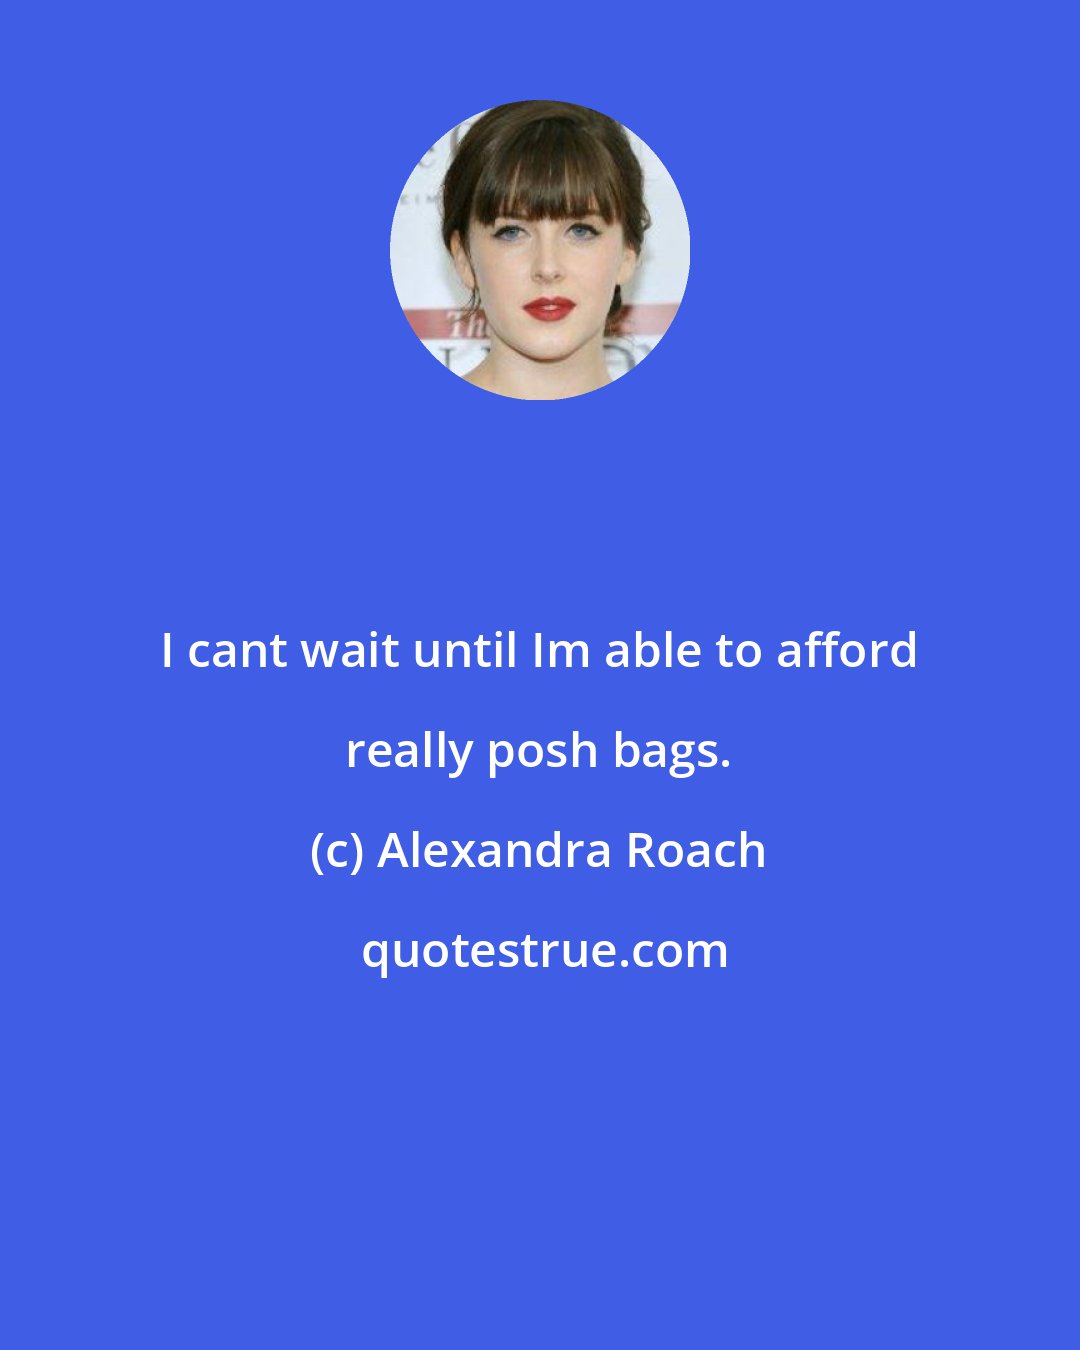 Alexandra Roach: I cant wait until Im able to afford really posh bags.